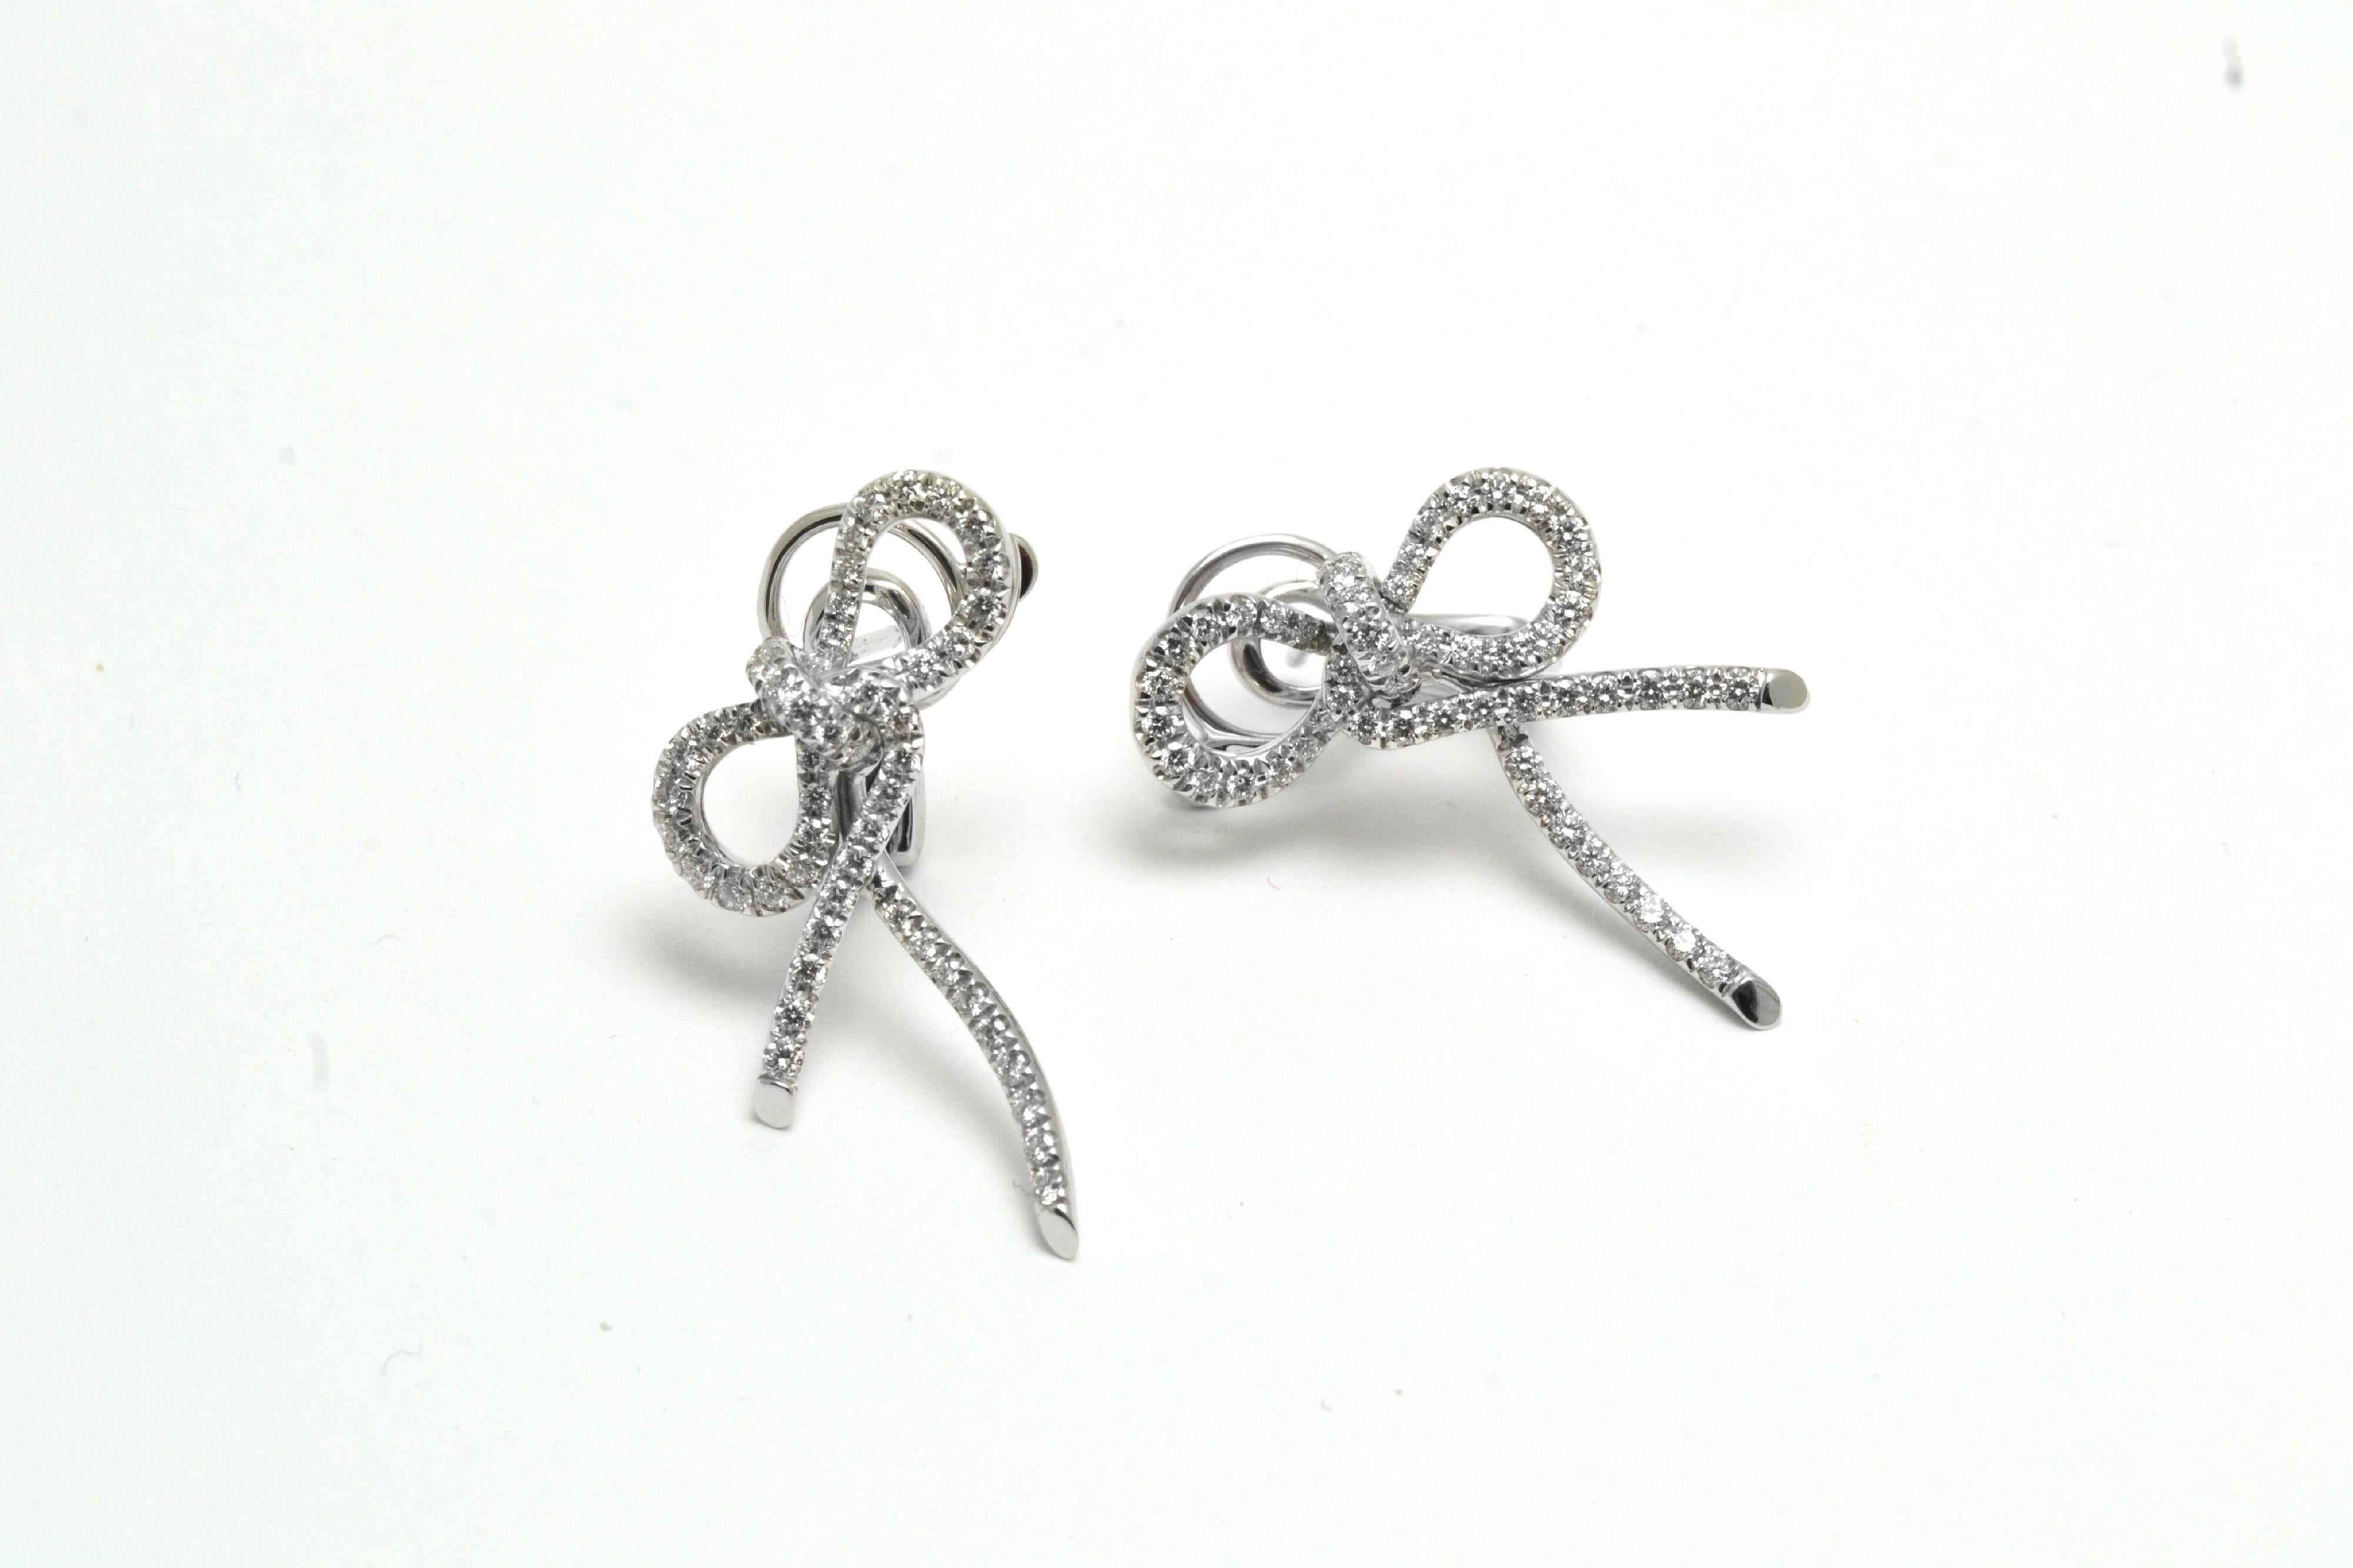 Enchanting Bow earrings, handmade in 18 Kt white gold, in our family workshop in Italy.
the are very carefully set with diamonda of best quality.
A  system at the back allows to add drops to the top of the earrings.
Please ask us for more